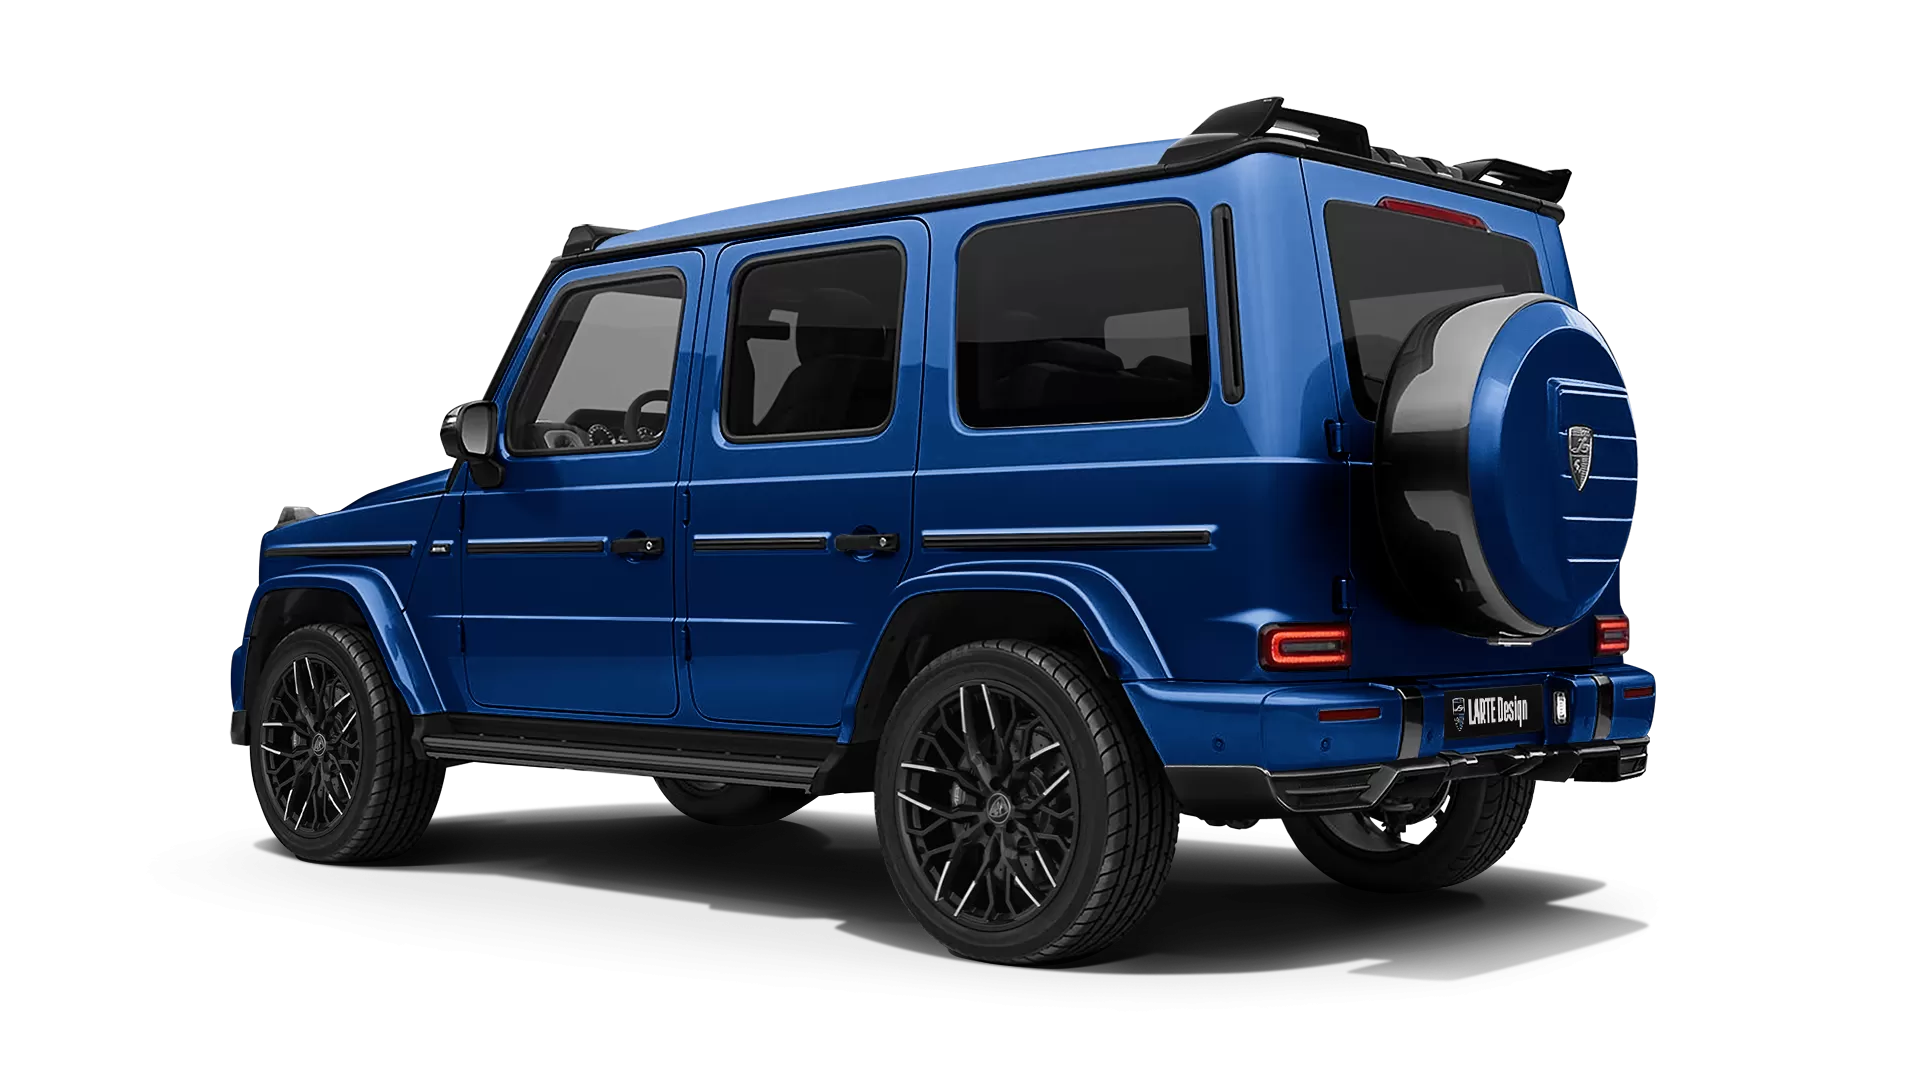 Mercedes G class W463 with painted body kit: rear view shown in Brilliant Blue